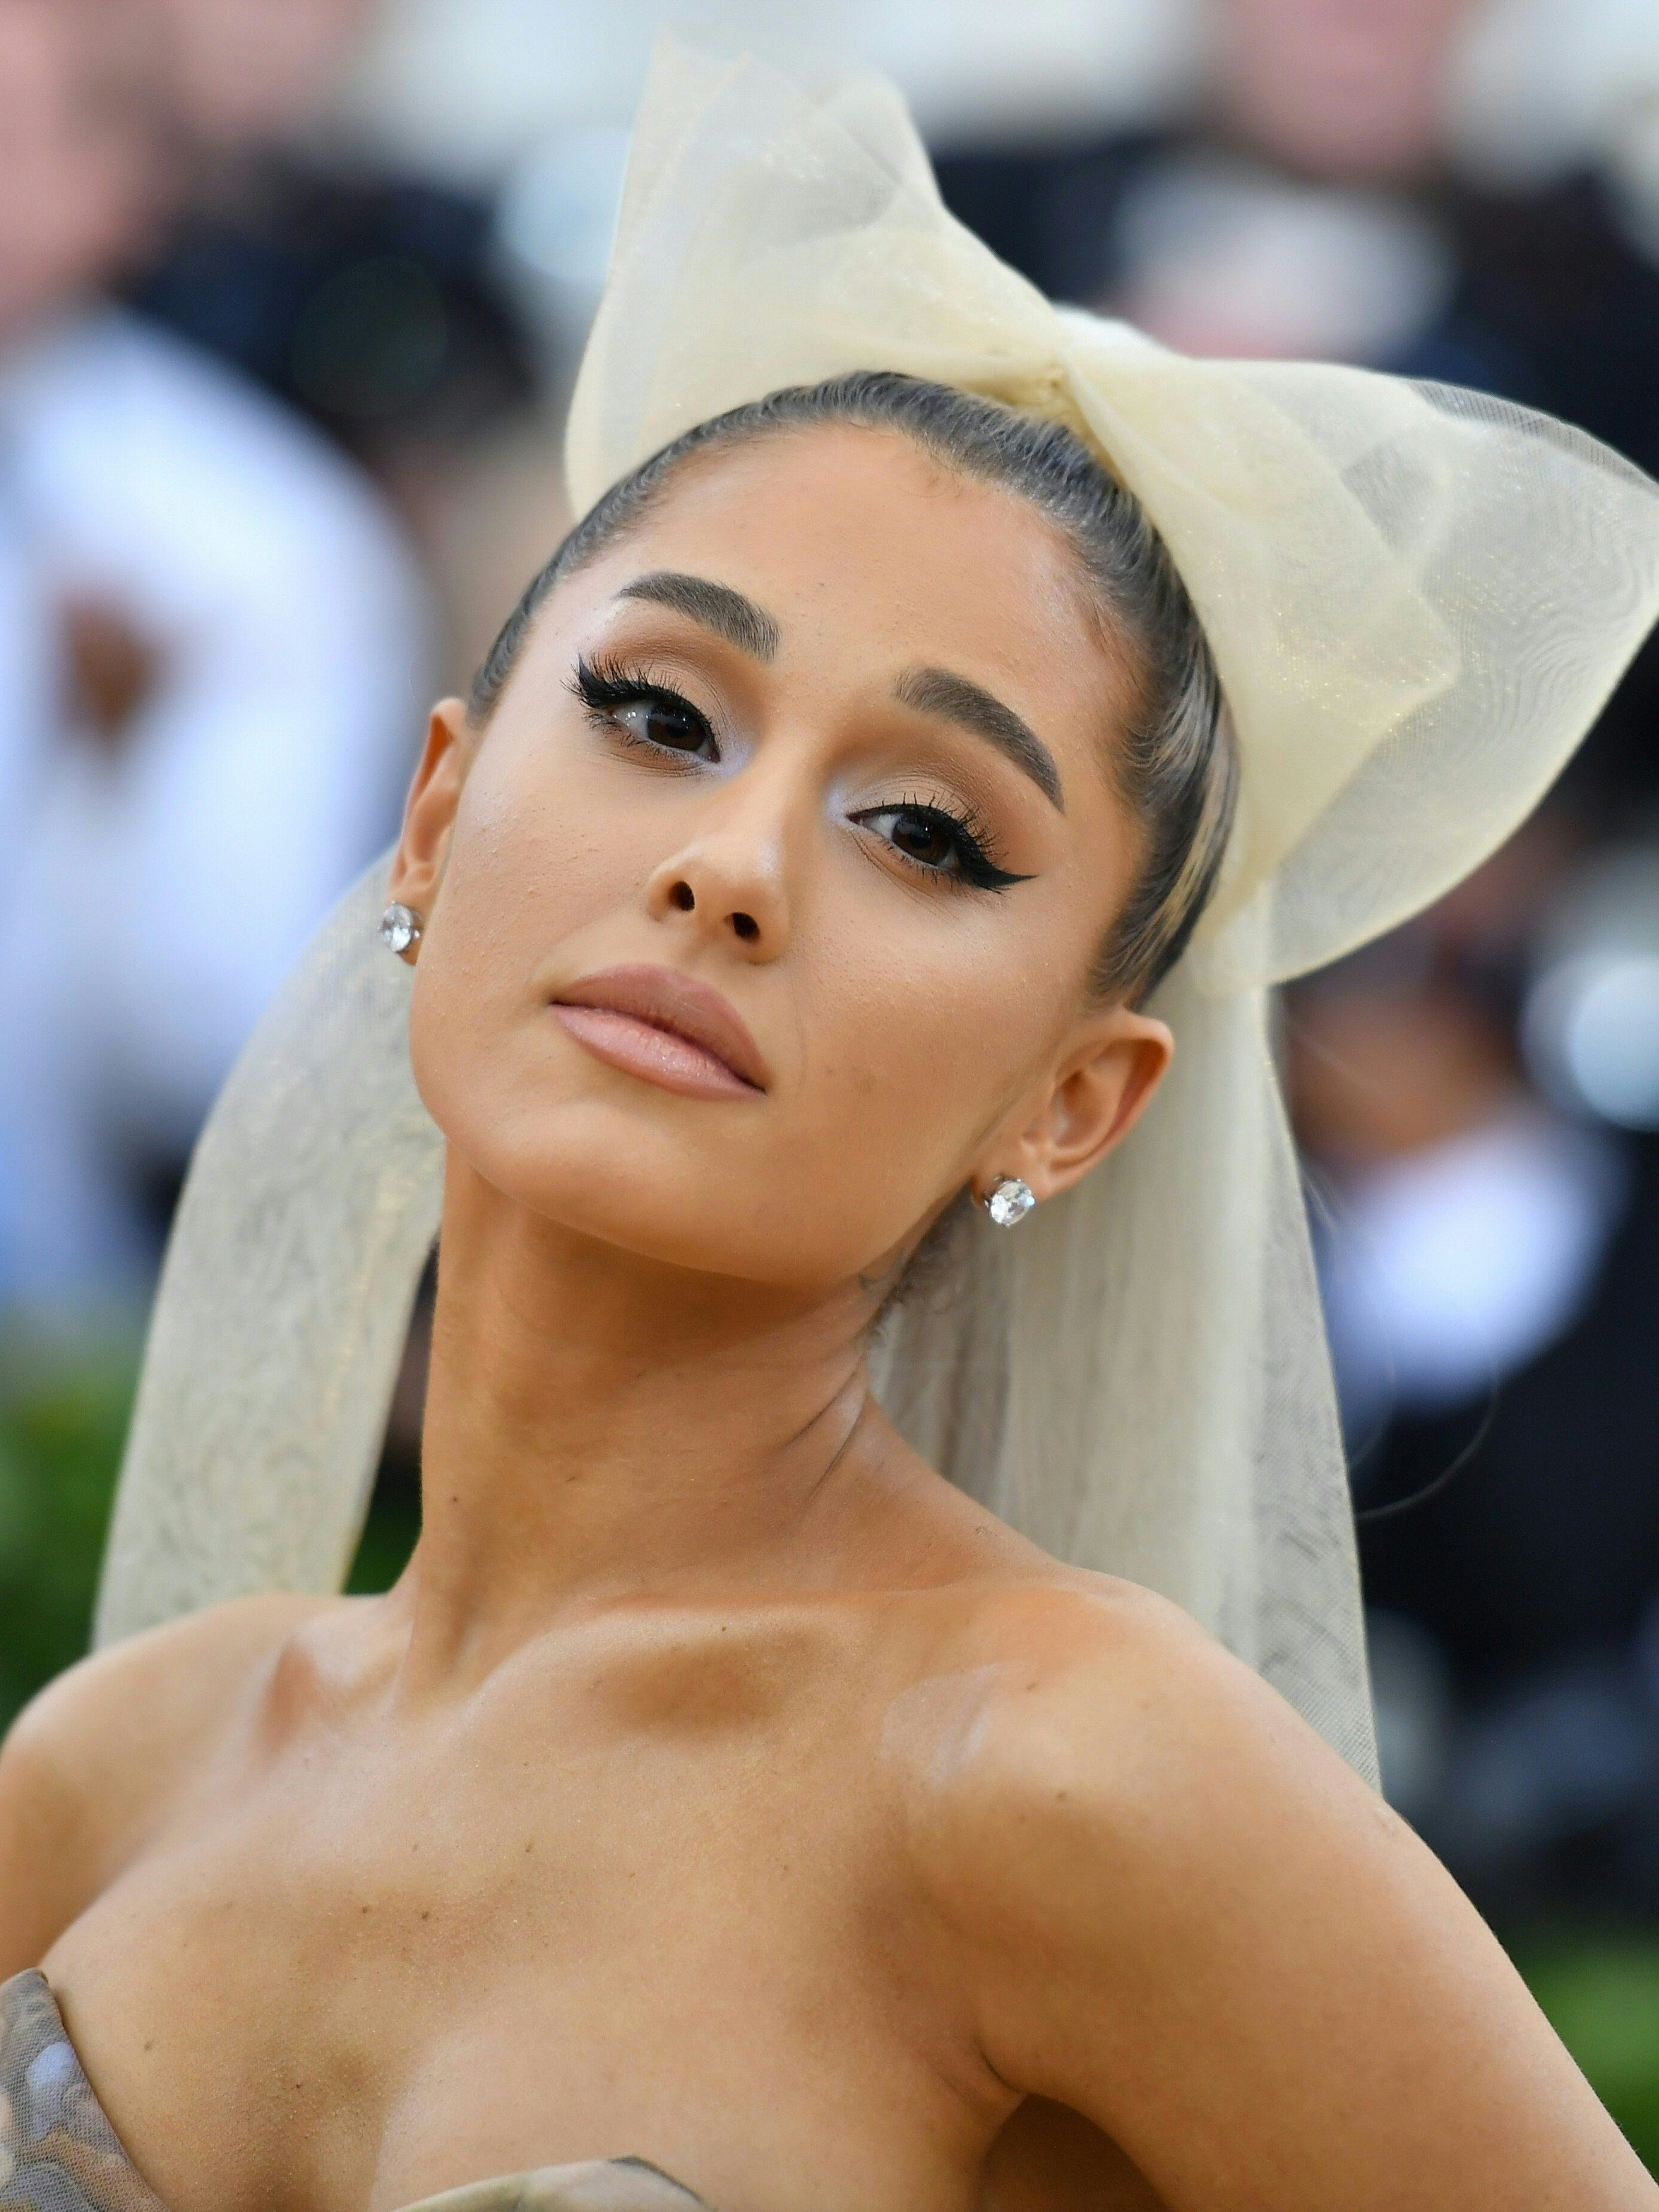 Ariana Grande Opens Up About Toxic Relationship With Ex